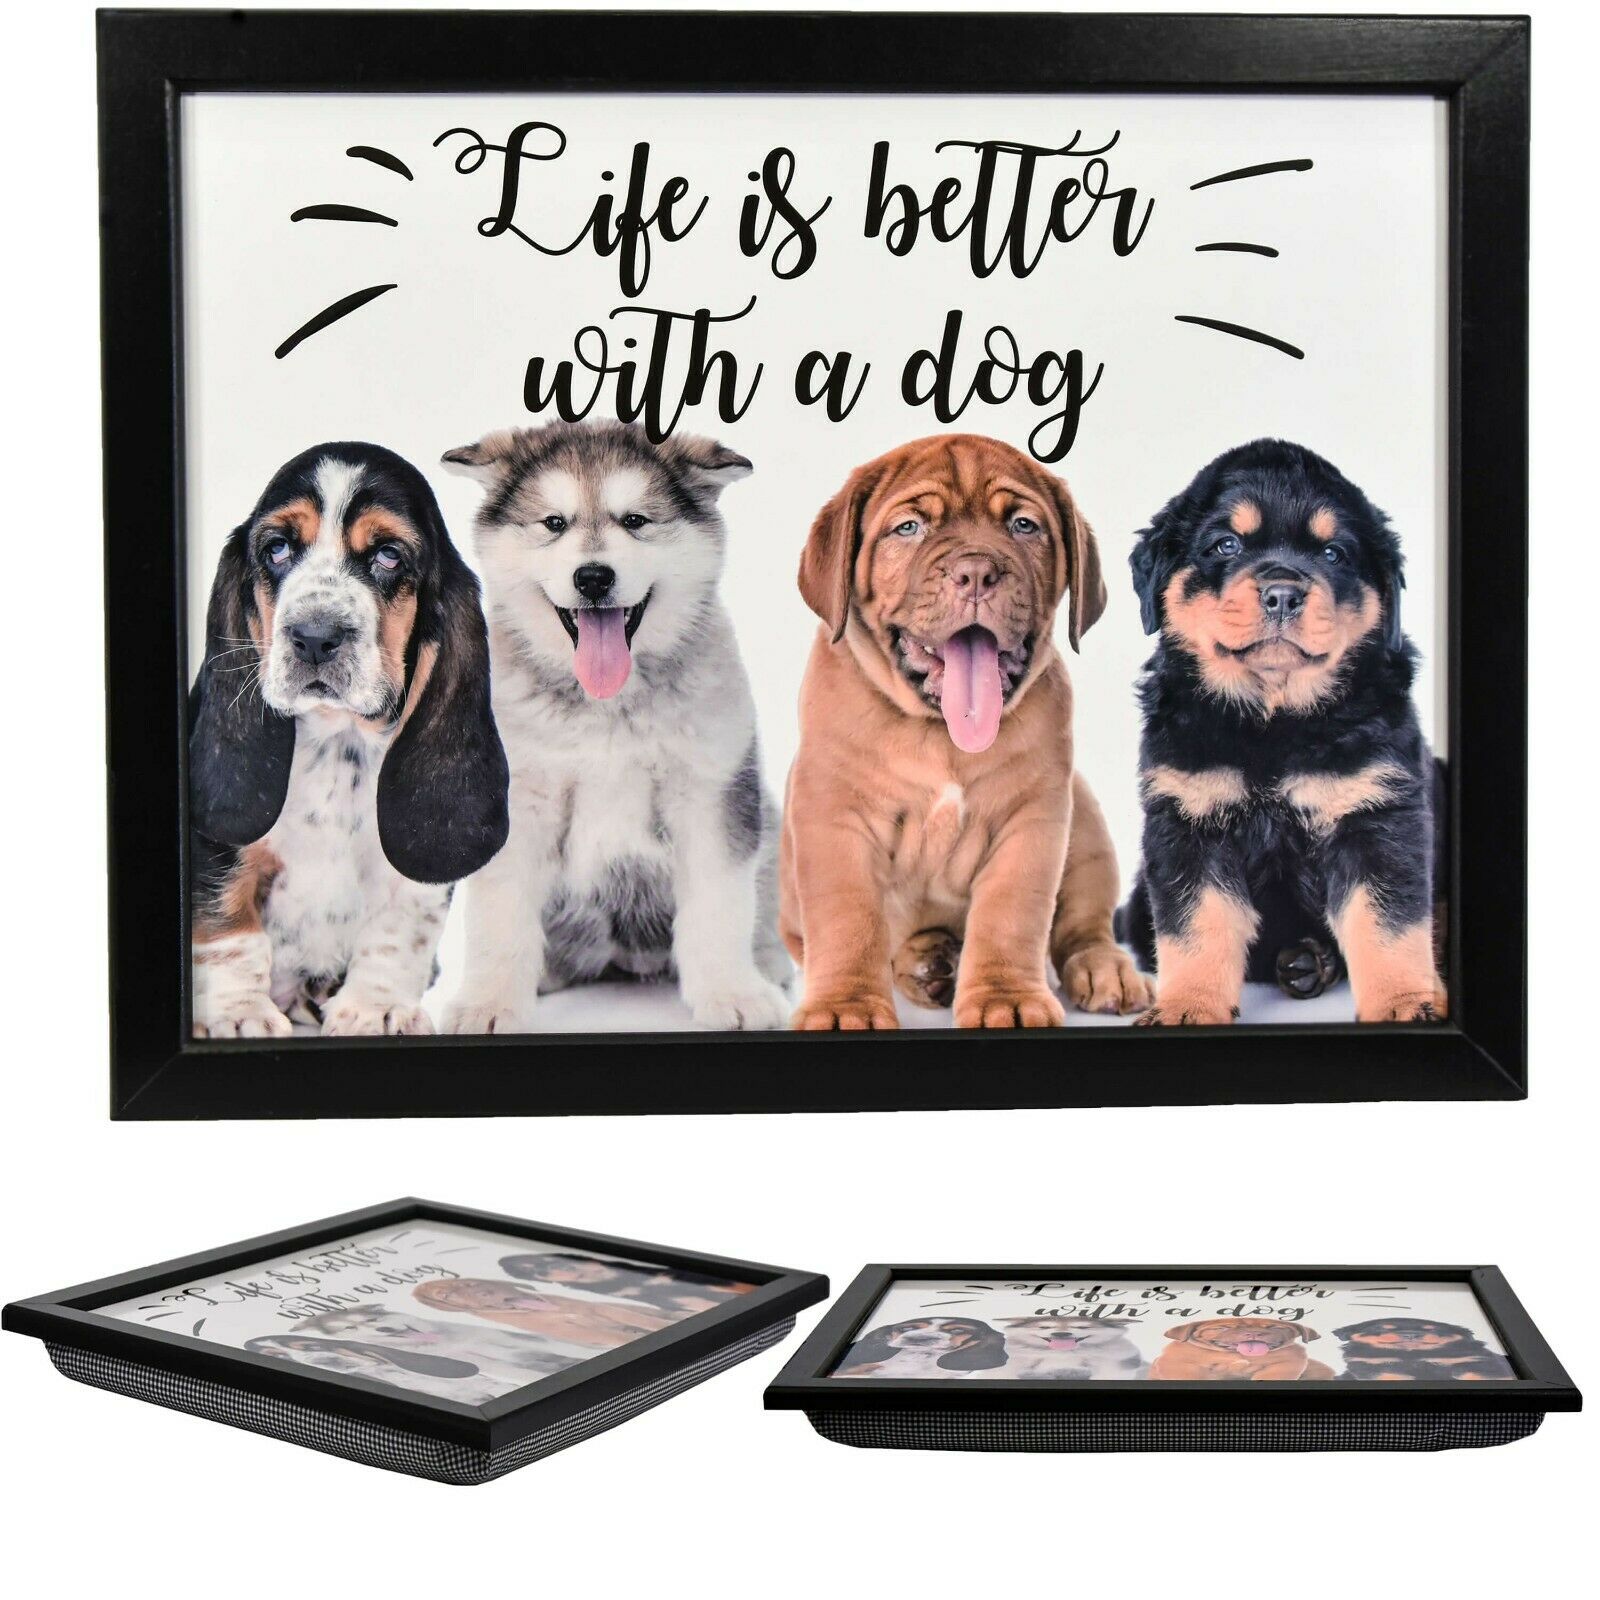 Dogs Lap Tray With Bean Bag Cushion The Magic Toy Shop - The Magic Toy Shop